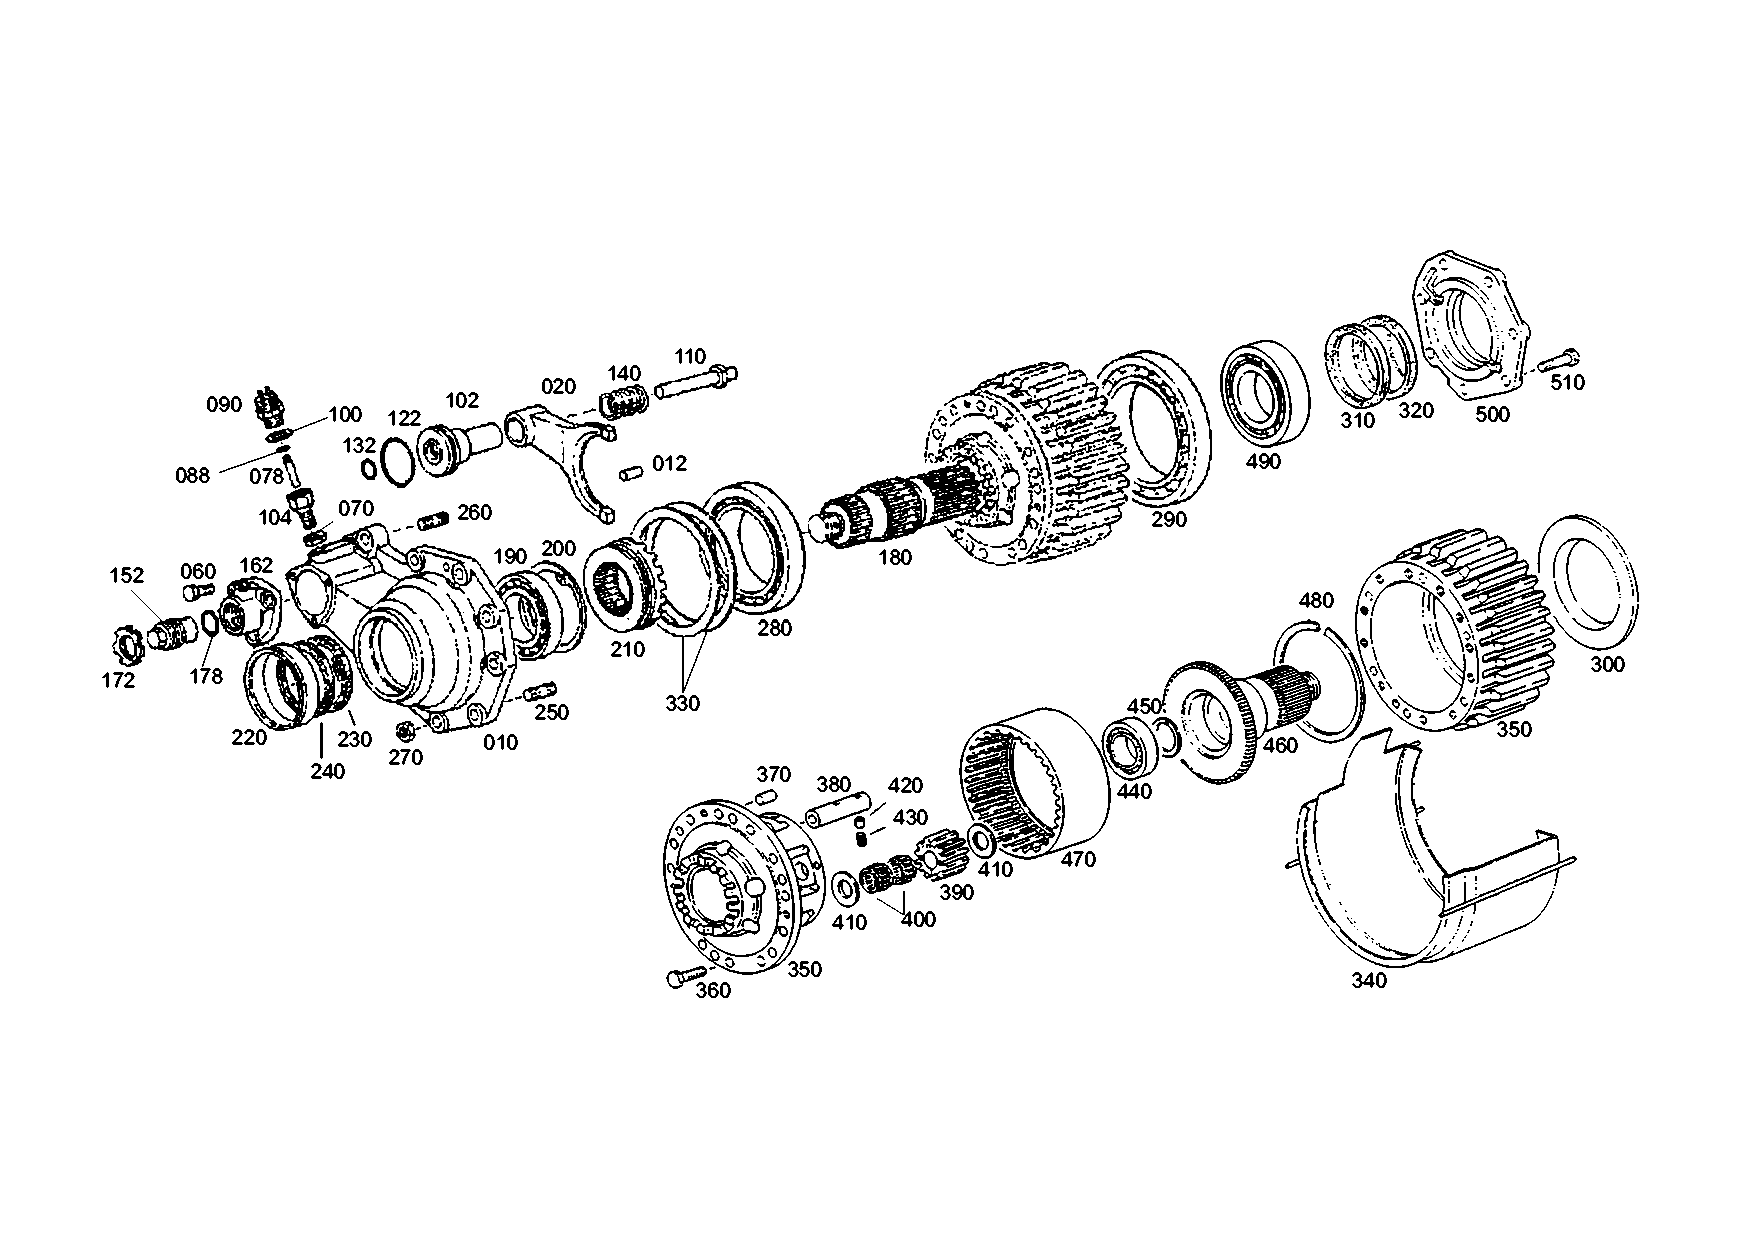 drawing for JOHN DEERE TTZF200848 - BEARING COVER (figure 5)